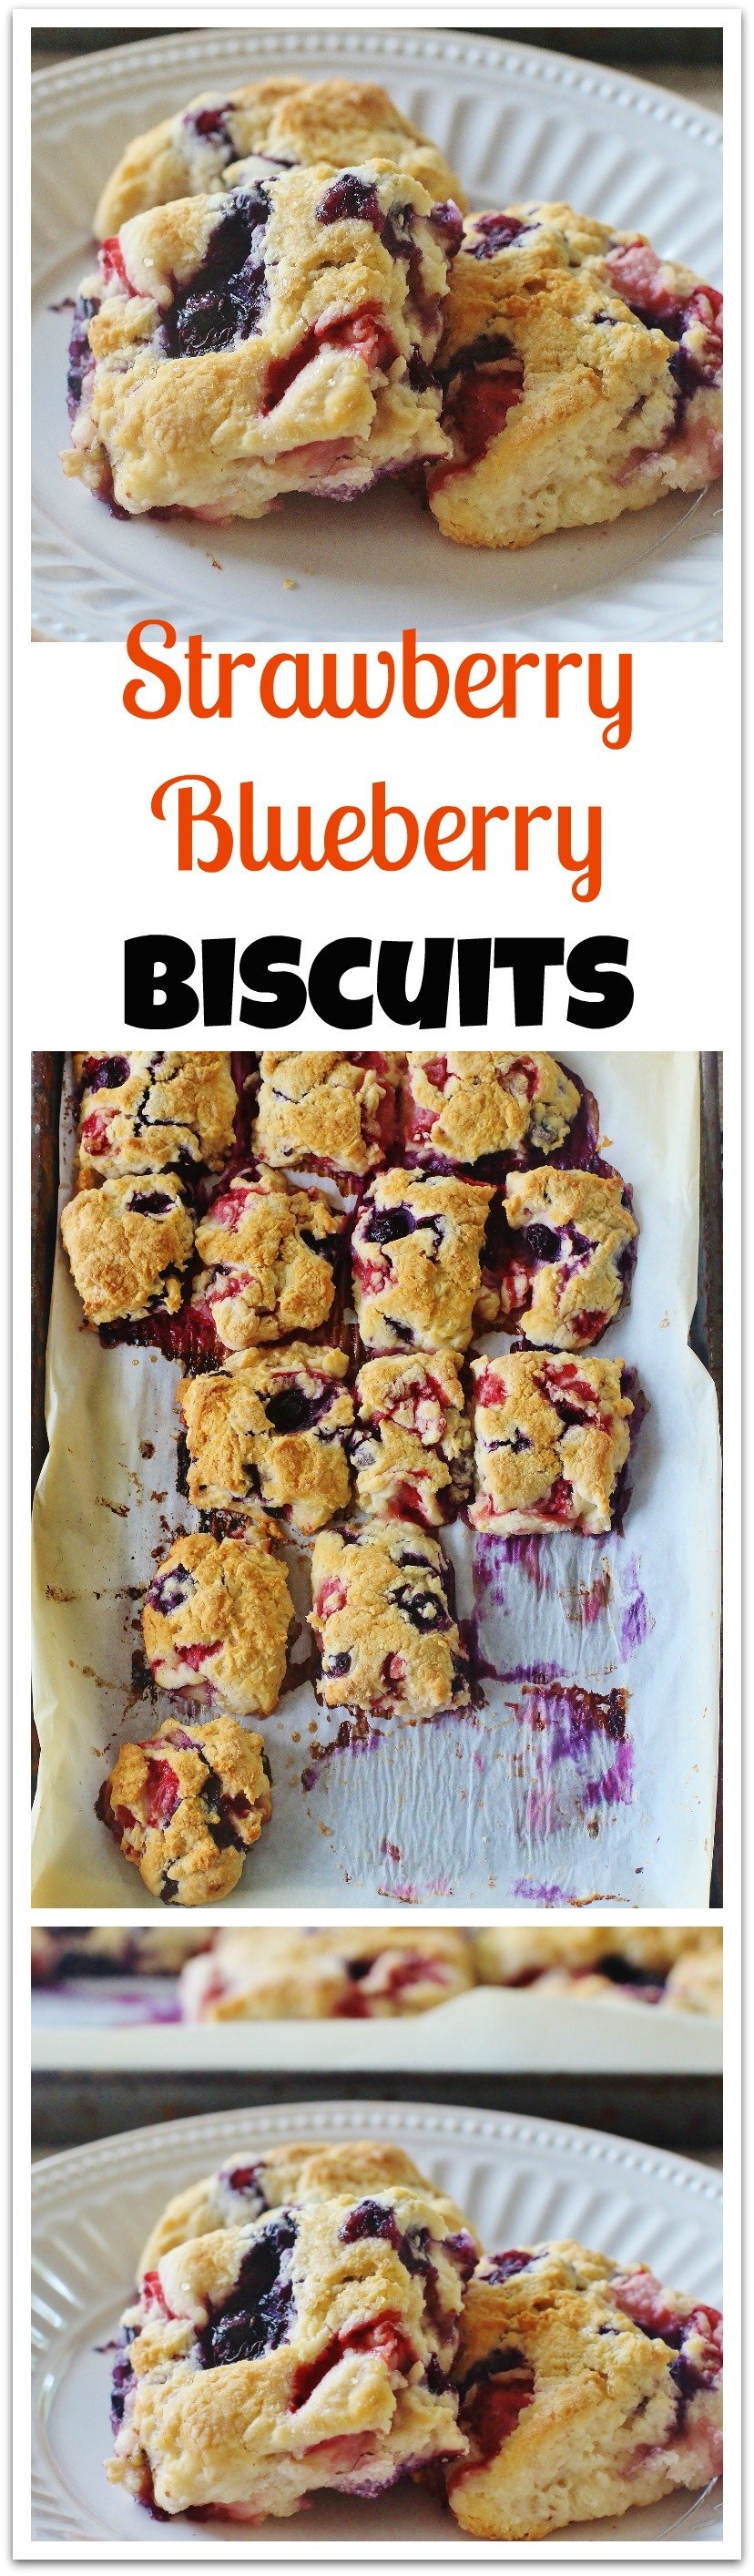 We had strawberries and blueberries in the refrigerator so adding berries to the biscuits was right and good. #StrawberryBlueberry #ButtermilkBiscuits